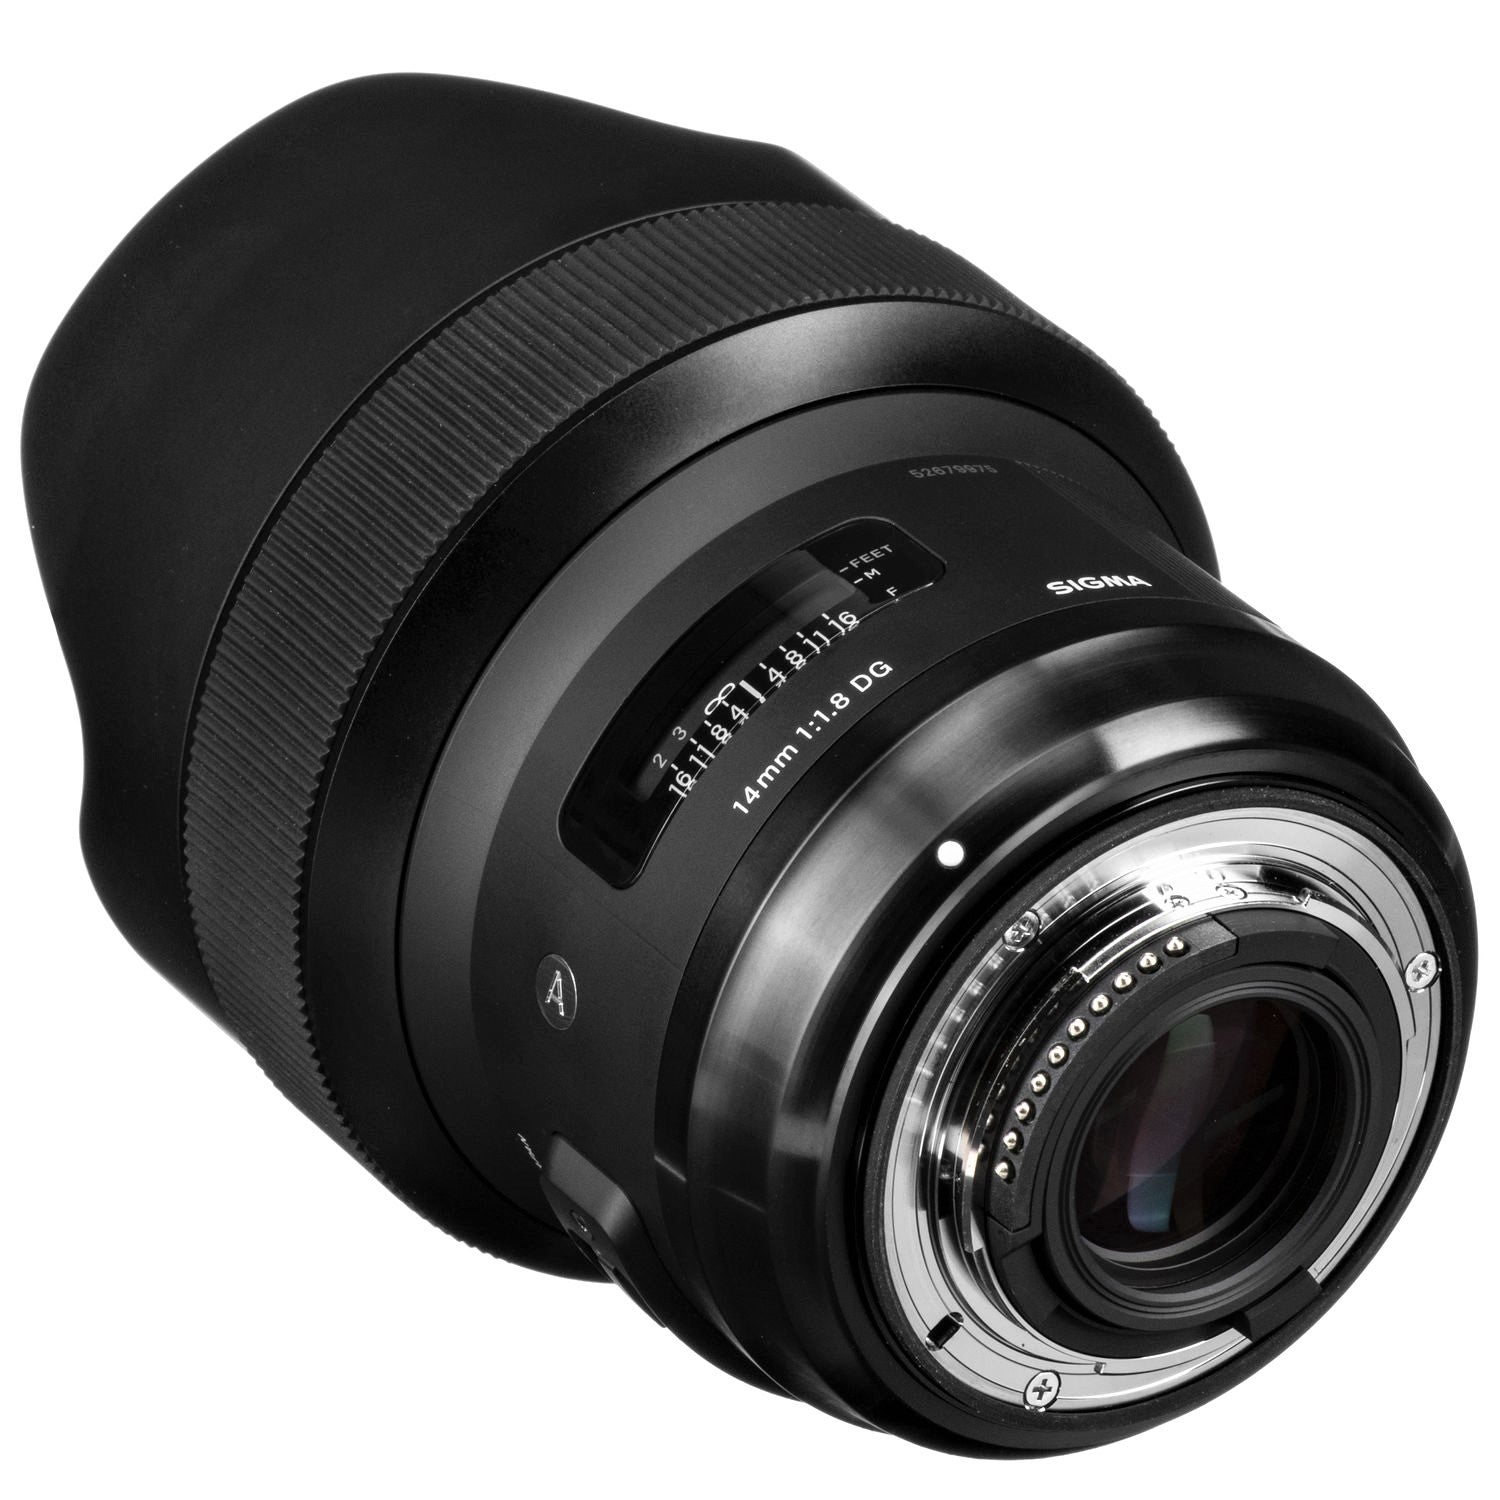 Sigma 14mm F1.8 DG HSM Art Lens for Nikon F in a Back-Side View